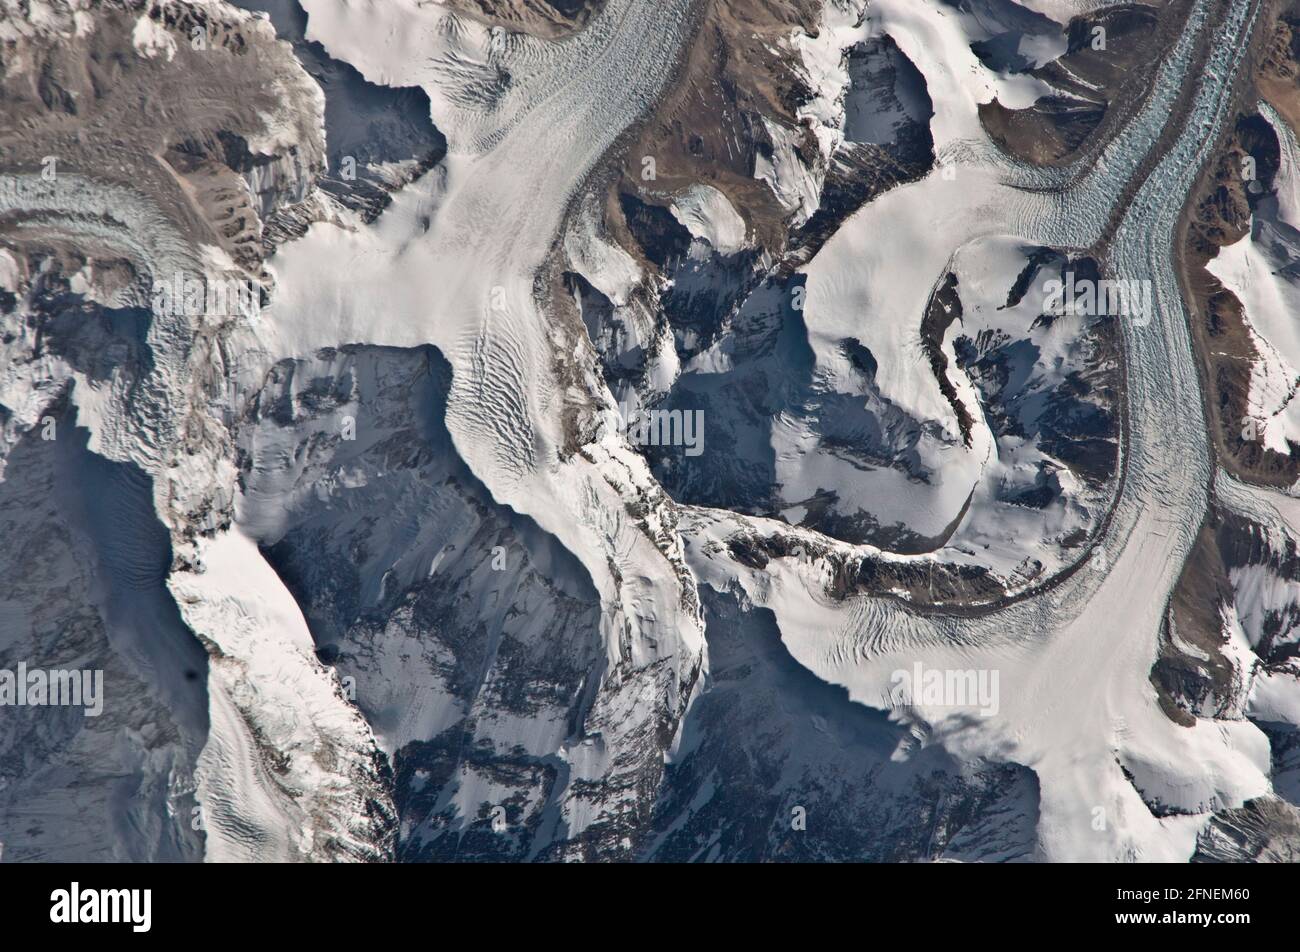 NEPAL / TIBET - 06 Jan 2011 - This image taken from the International Space Station shows the glaciers around the north western side of Mount Everest Stock Photo